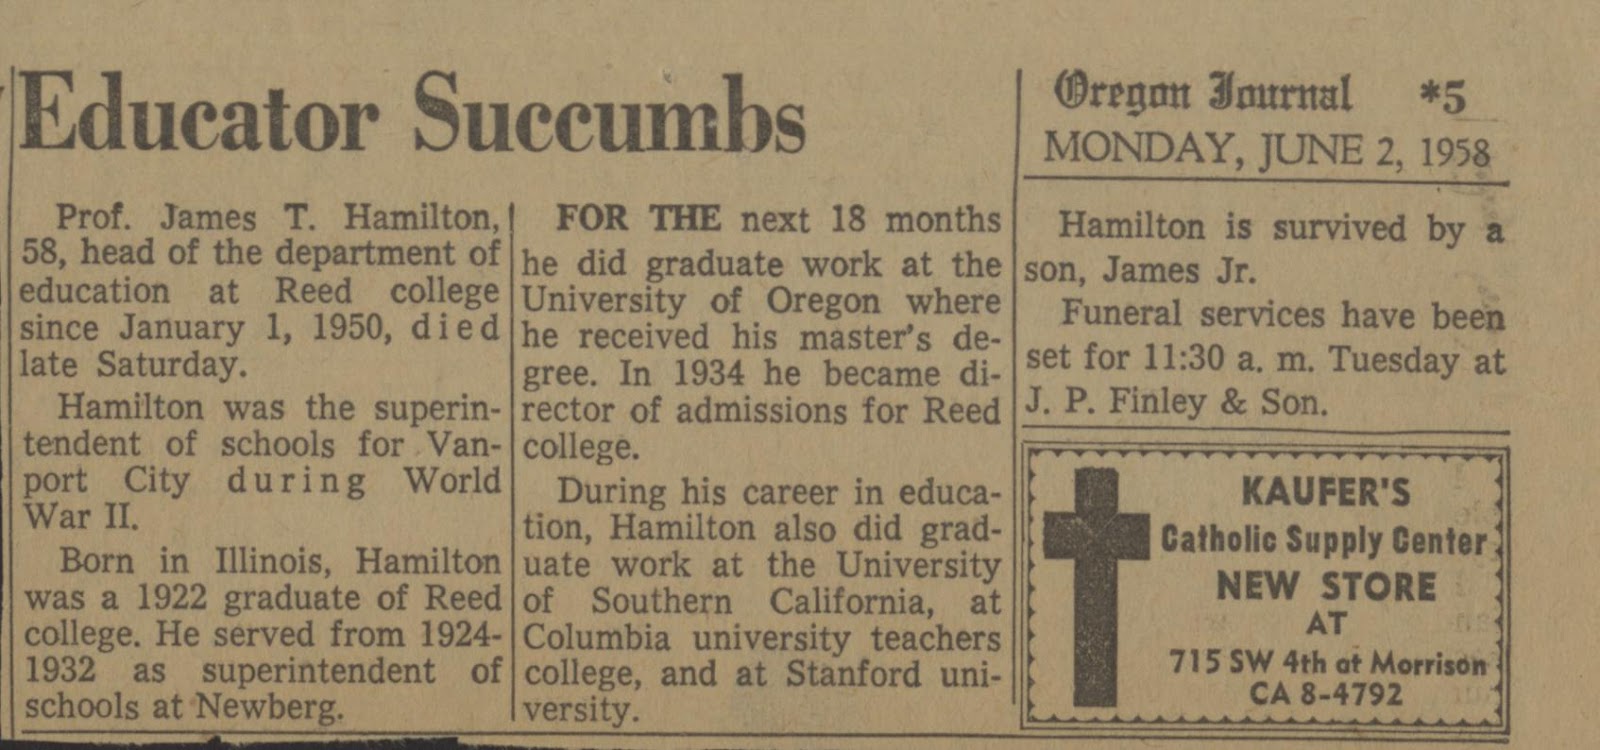 Oregon Journal newspaper with headline "Educator Succumbs. Monday, June 2, 1958." "Prof. James T. Hamilton, 58, head of the department of education at Reed college since January 1, 1950, died late Saturday. Hamilton was the superintendent of schools for Vanport City during World War II. Born in Illinois, Hamilton was a 1922 graduate of Reed college. He served from 1924-1932 as superintendent of schools at Newberg. For the next 18 month he received his master's degree. In 1934 he became director of admissions for Reed college. During his career in education, Hamilton also did graduate work at the University of Southern California, at Columbia university teachers college, and at Stanford university. 
Hamilton is survived by a son, James Jr. Funeral services have been set for 11:30 a.m. Tuesday at J. P. Finely & Son."